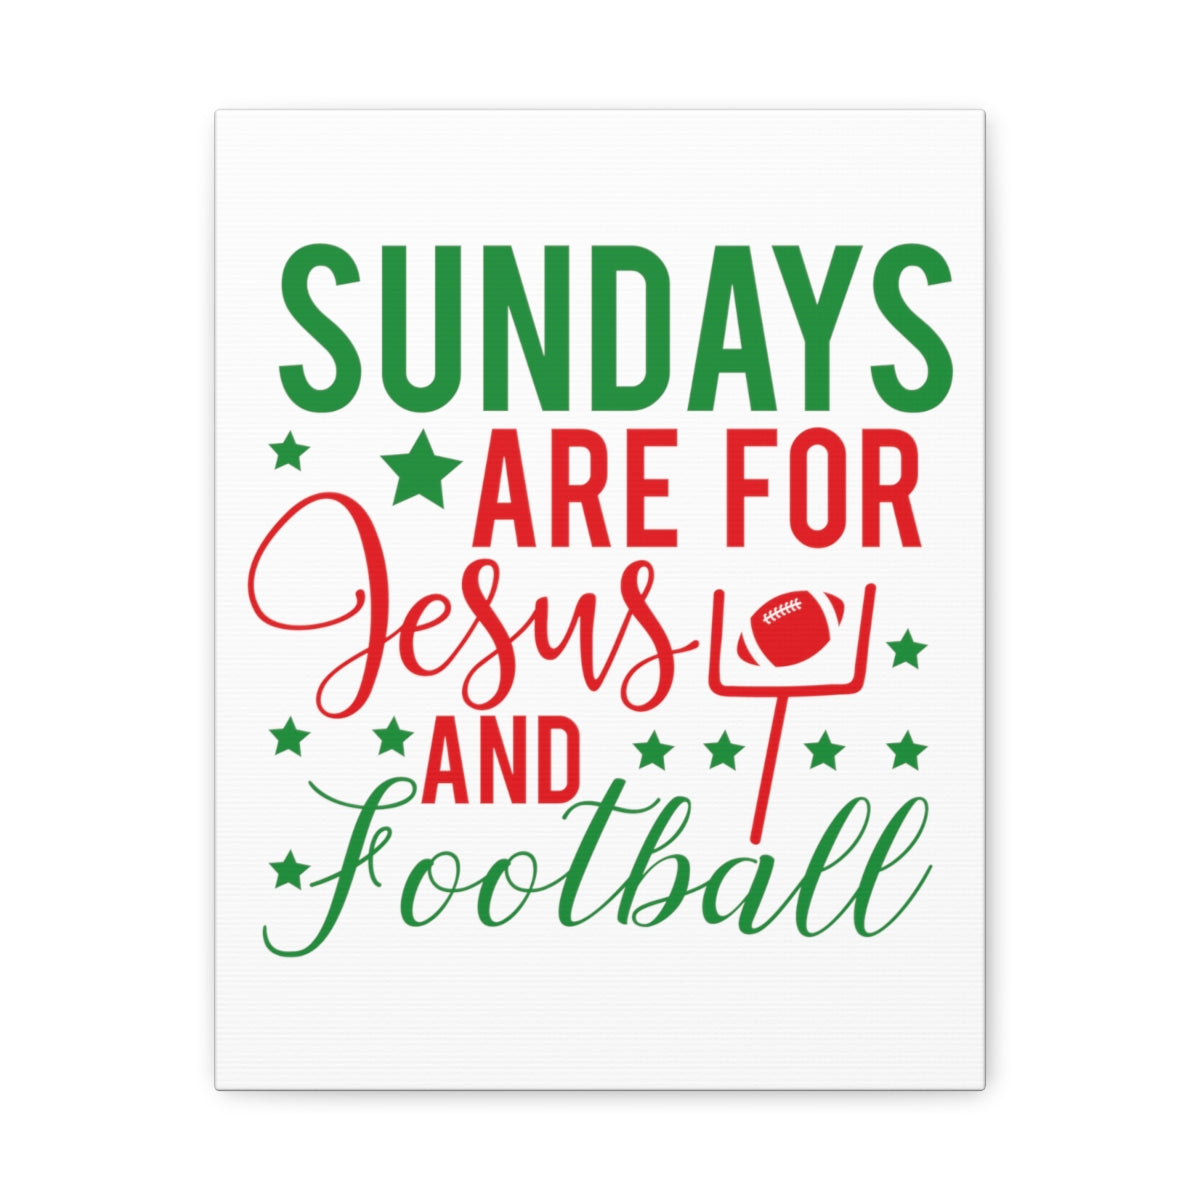 Scripture Walls Jesus And Football Mark 2:27-28 Christian Wall Art Print Ready to Hang Unframed-Express Your Love Gifts